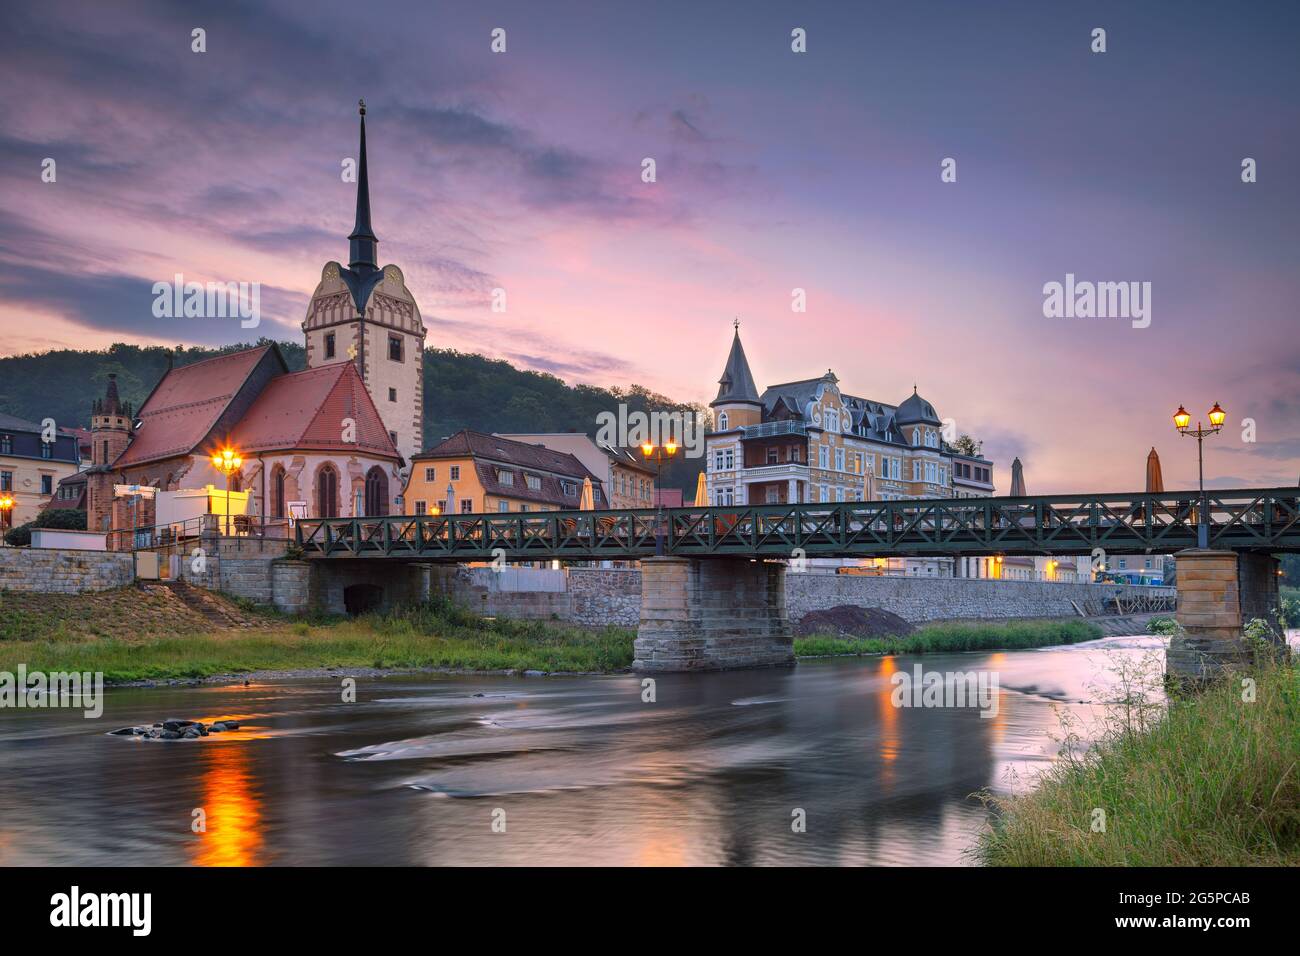 Gera, Germany. Cityscape image of old town Gera, Thuringia, Germany with St. Mary's Church and Untermhaus Bridge over White Elster River at sunset. Stock Photo